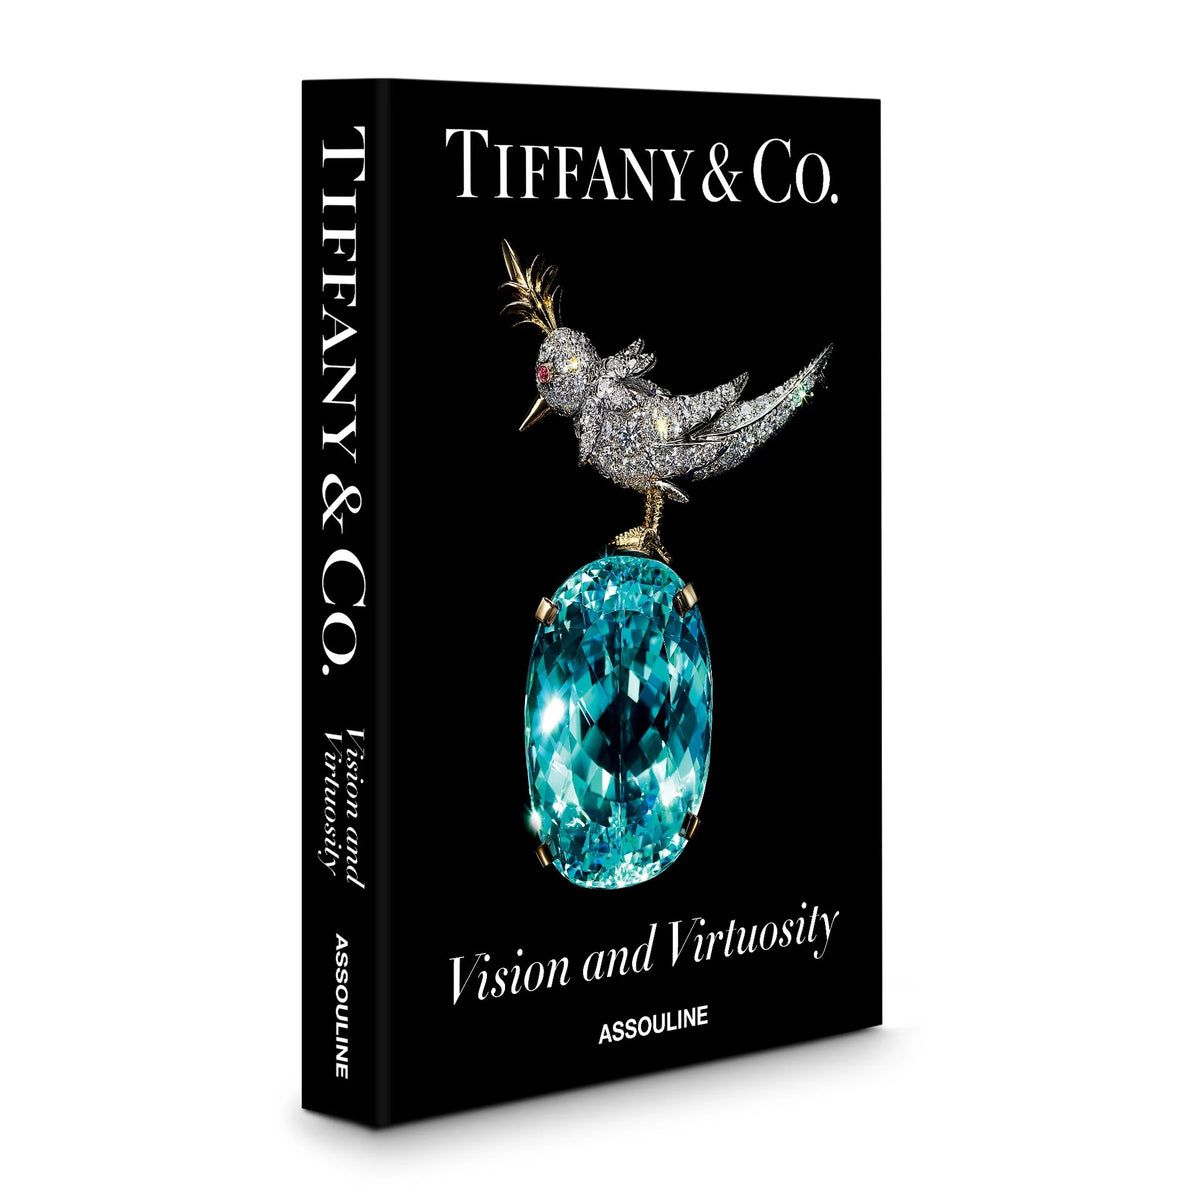 Tiffany and Co. Vision and Virtuosity hardcover illustrated book